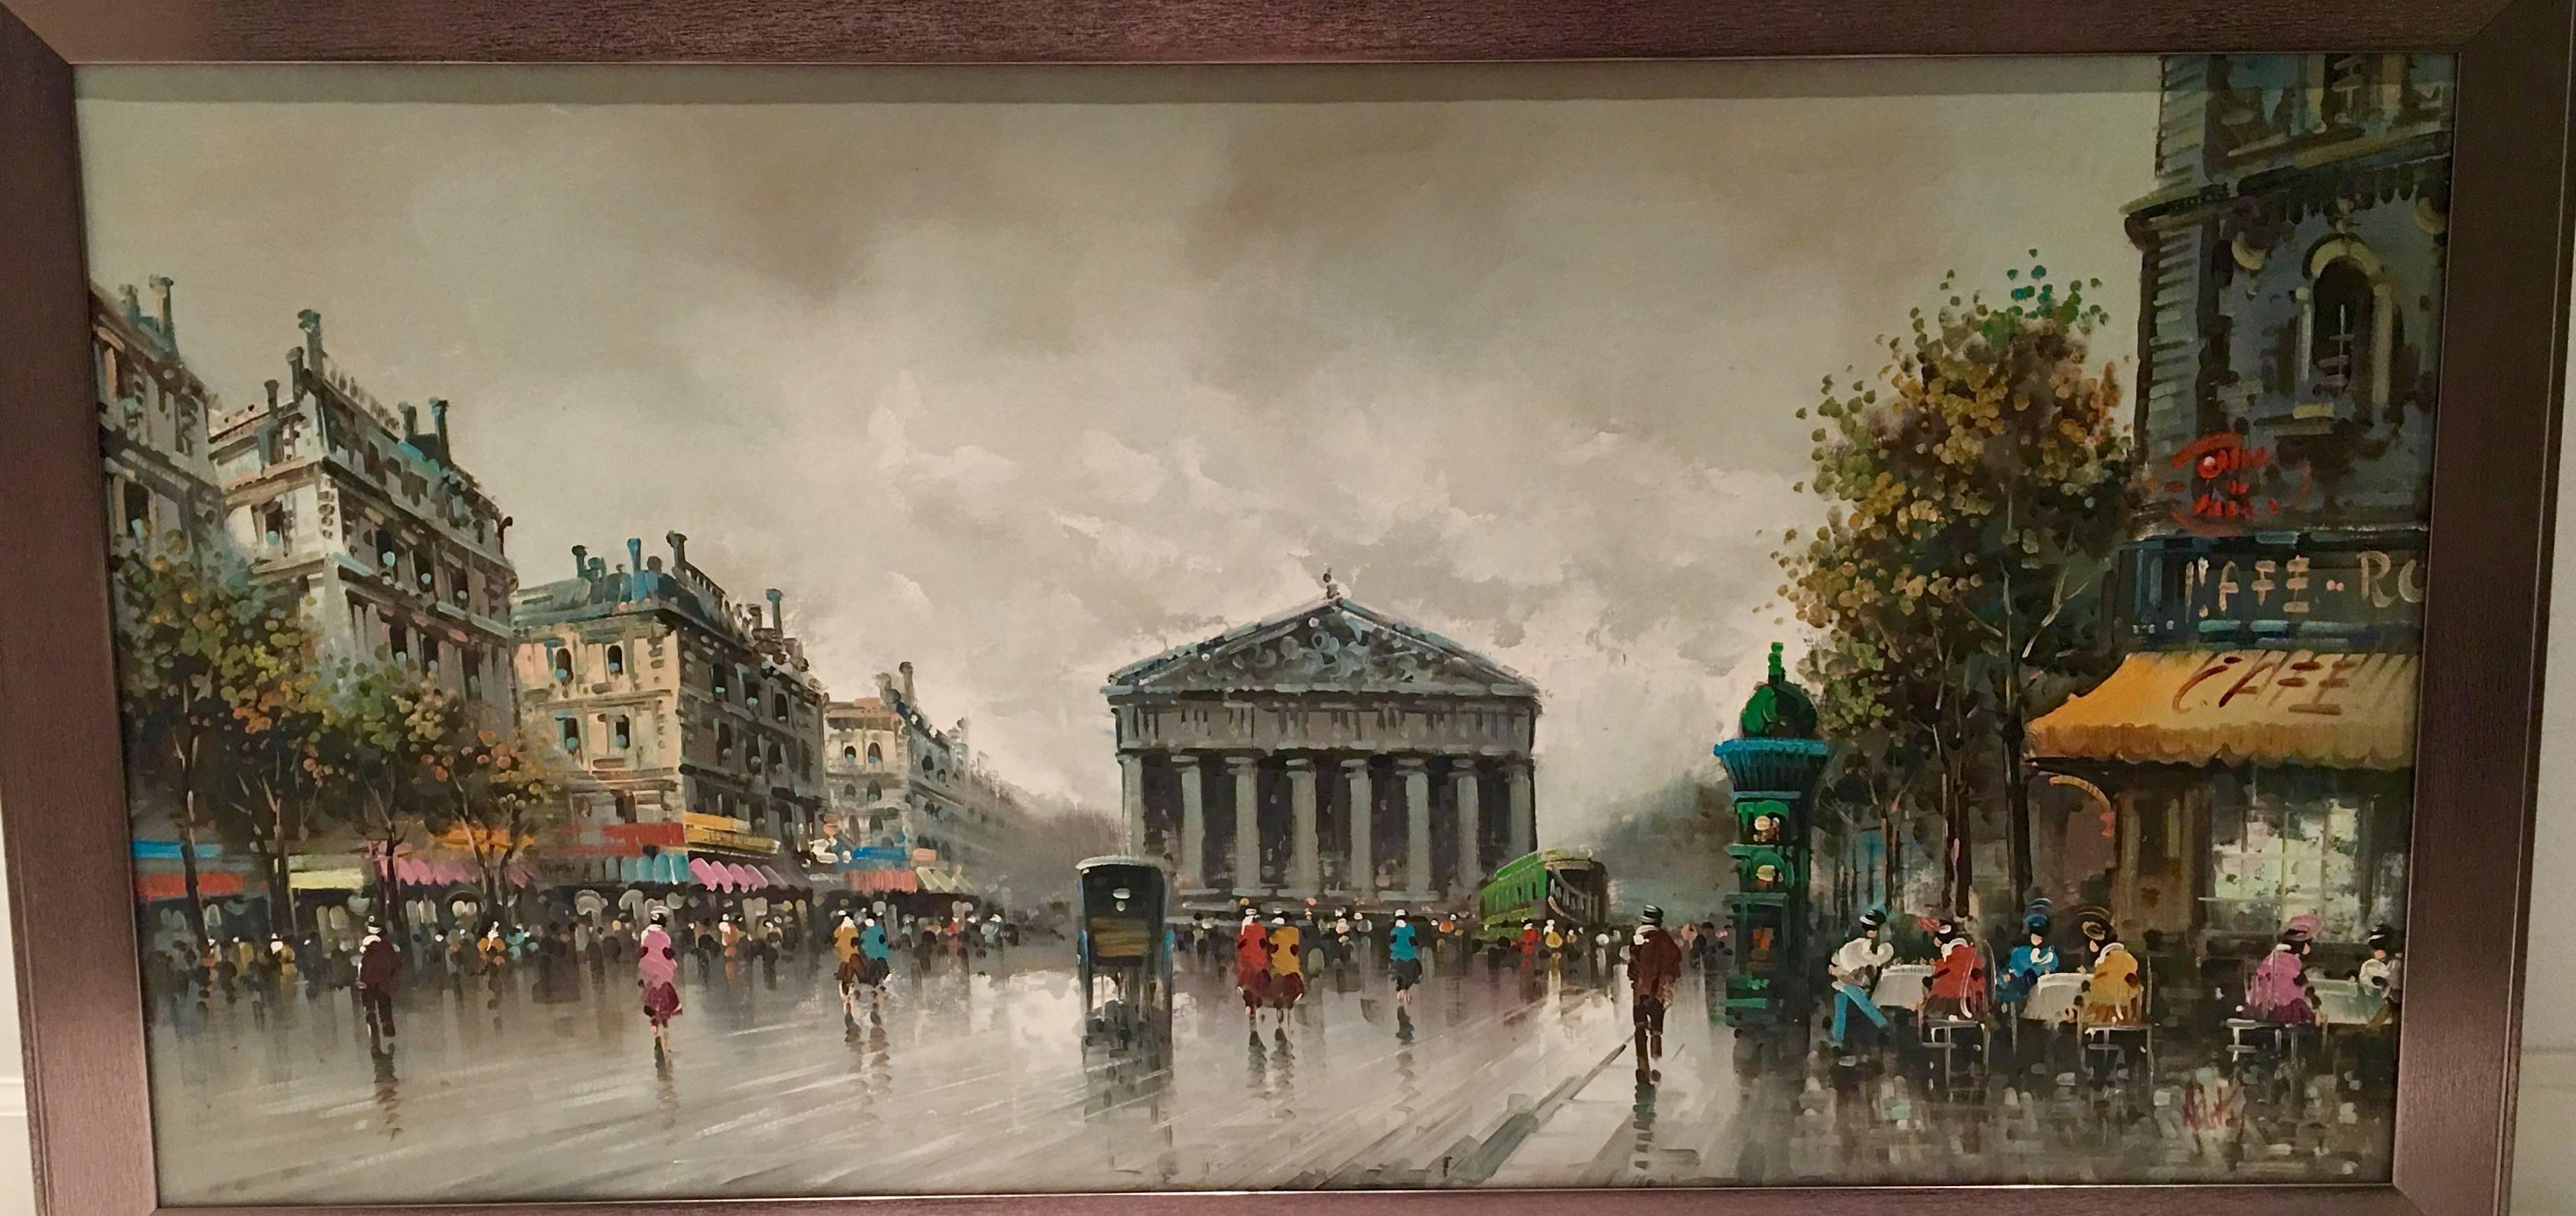 Original Impressionist oil painting on canvas signed lower right by, Antonio DeVity Italy (b.1902 - d.1993). Painting depicts a Paris street scene with some people gathered at cafes and others walking down the street just after it has rained. COA